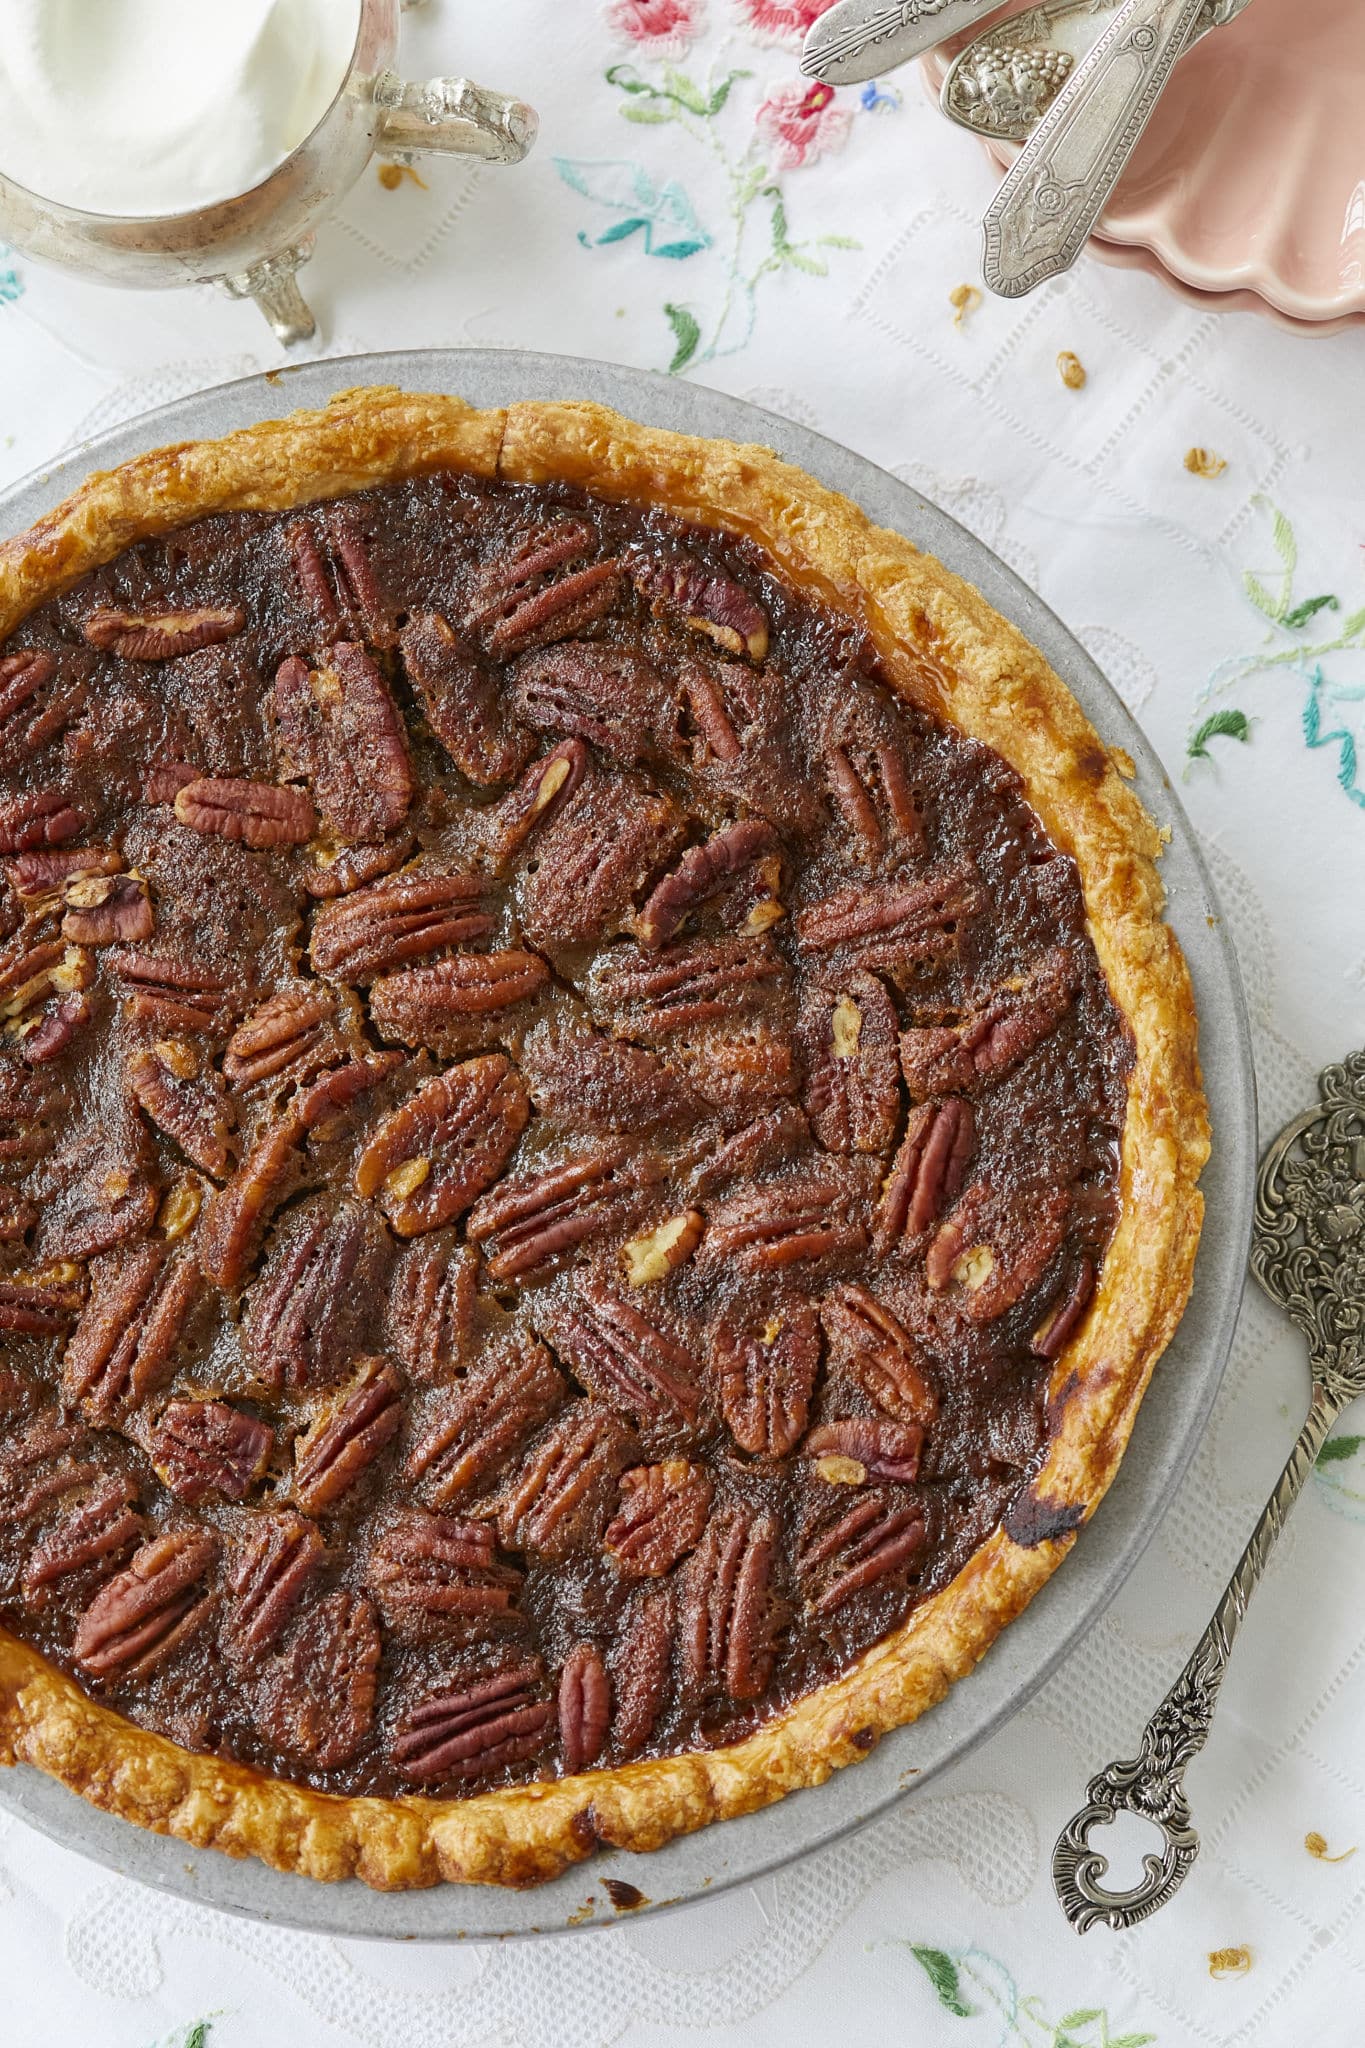 A close-up image, shot from above, of the pumpkin pecan pie. The pie crust is golden brown and the top layer of the pie is covered in pecans.